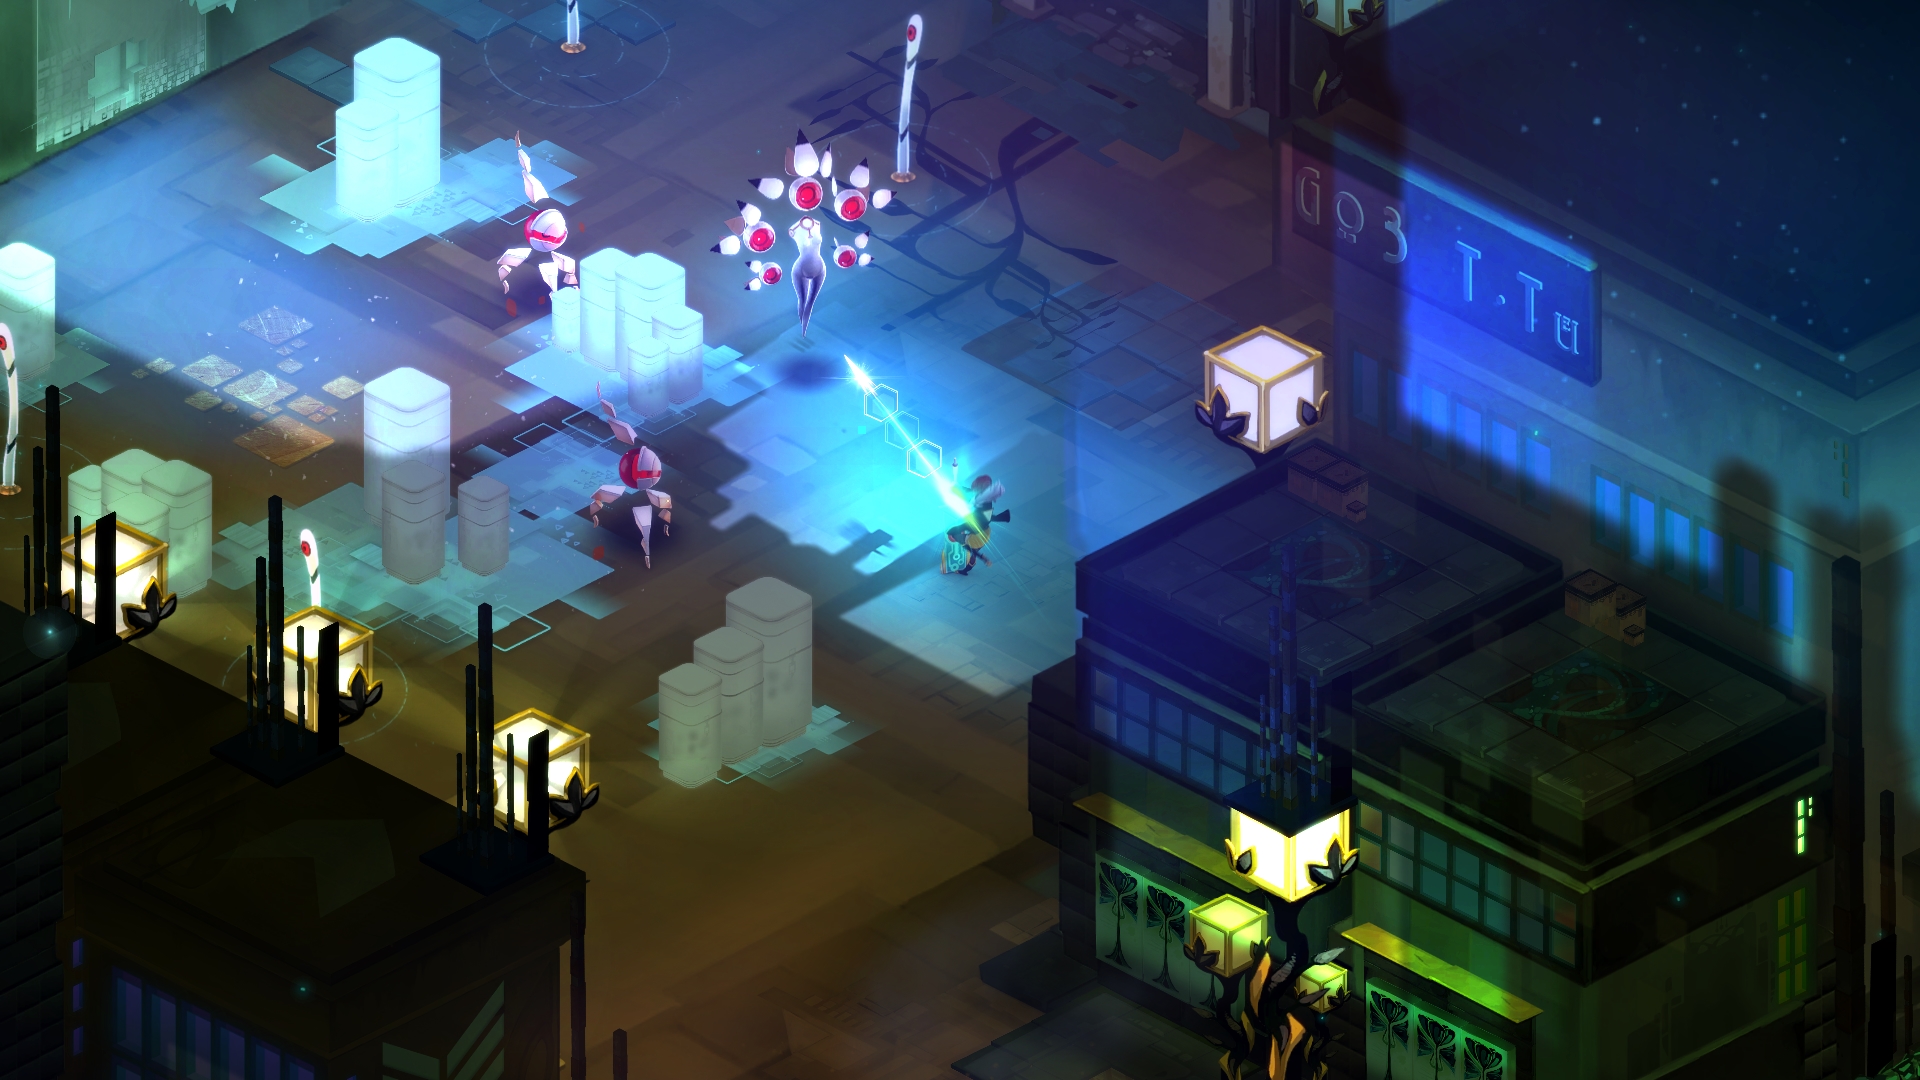 HD desktop wallpaper depicting a scene from the game Transistor, showcasing character combat on a dimly lit, futuristic cityscape.